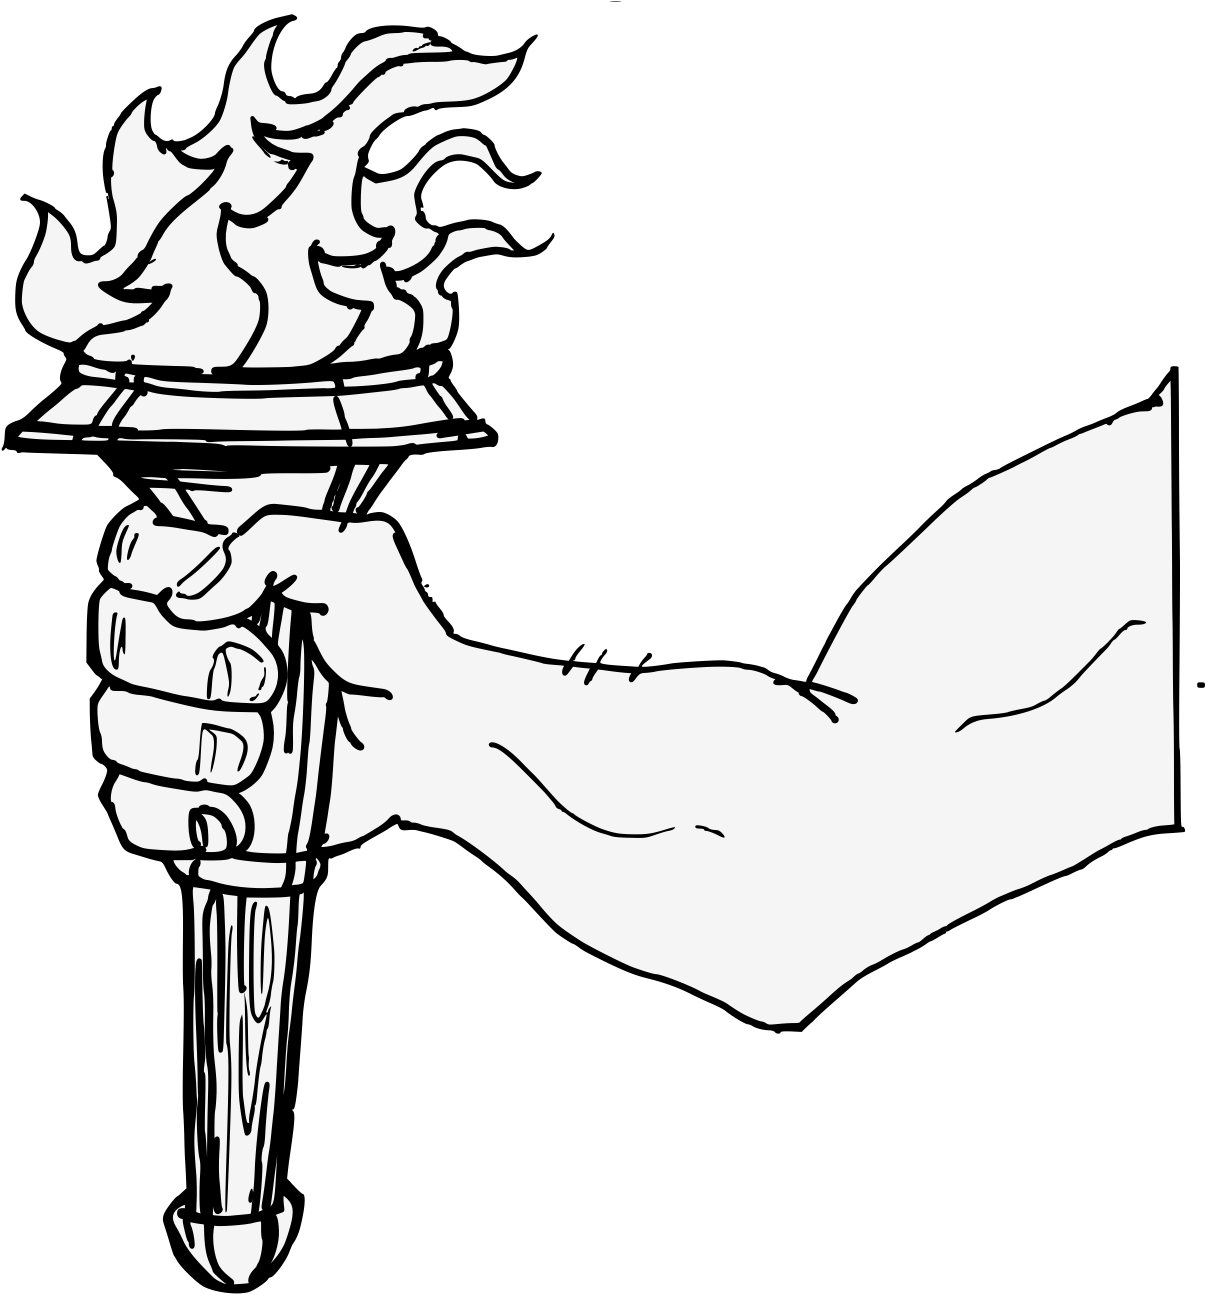 Arm Couped Maintaining A Torch - Line Art (1218x1316)